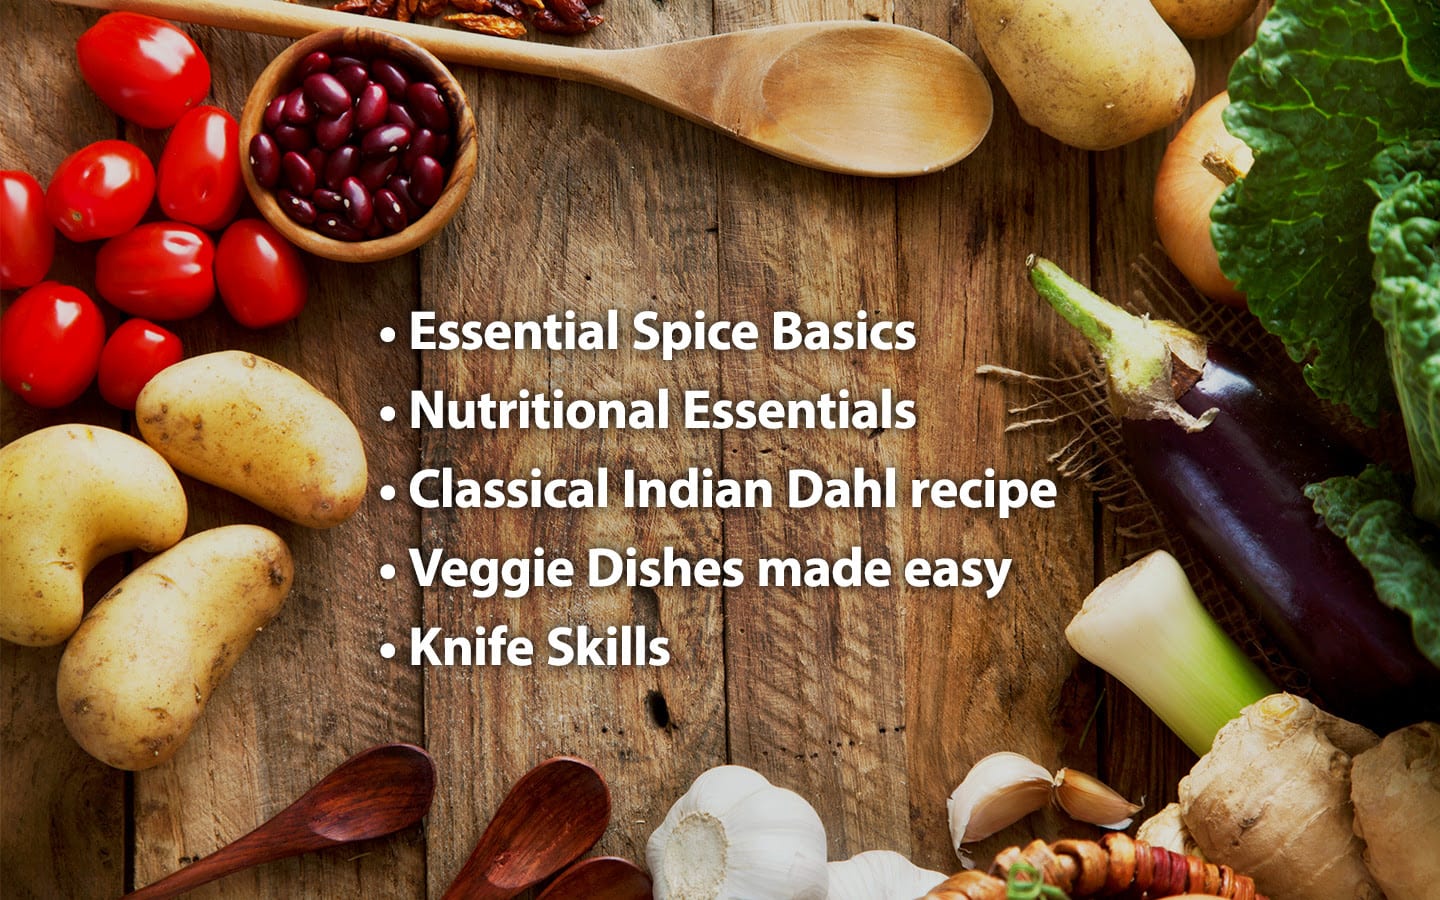 Basic features of the vegetarian cooking wellness retreat at the Amrit Yoga Institute